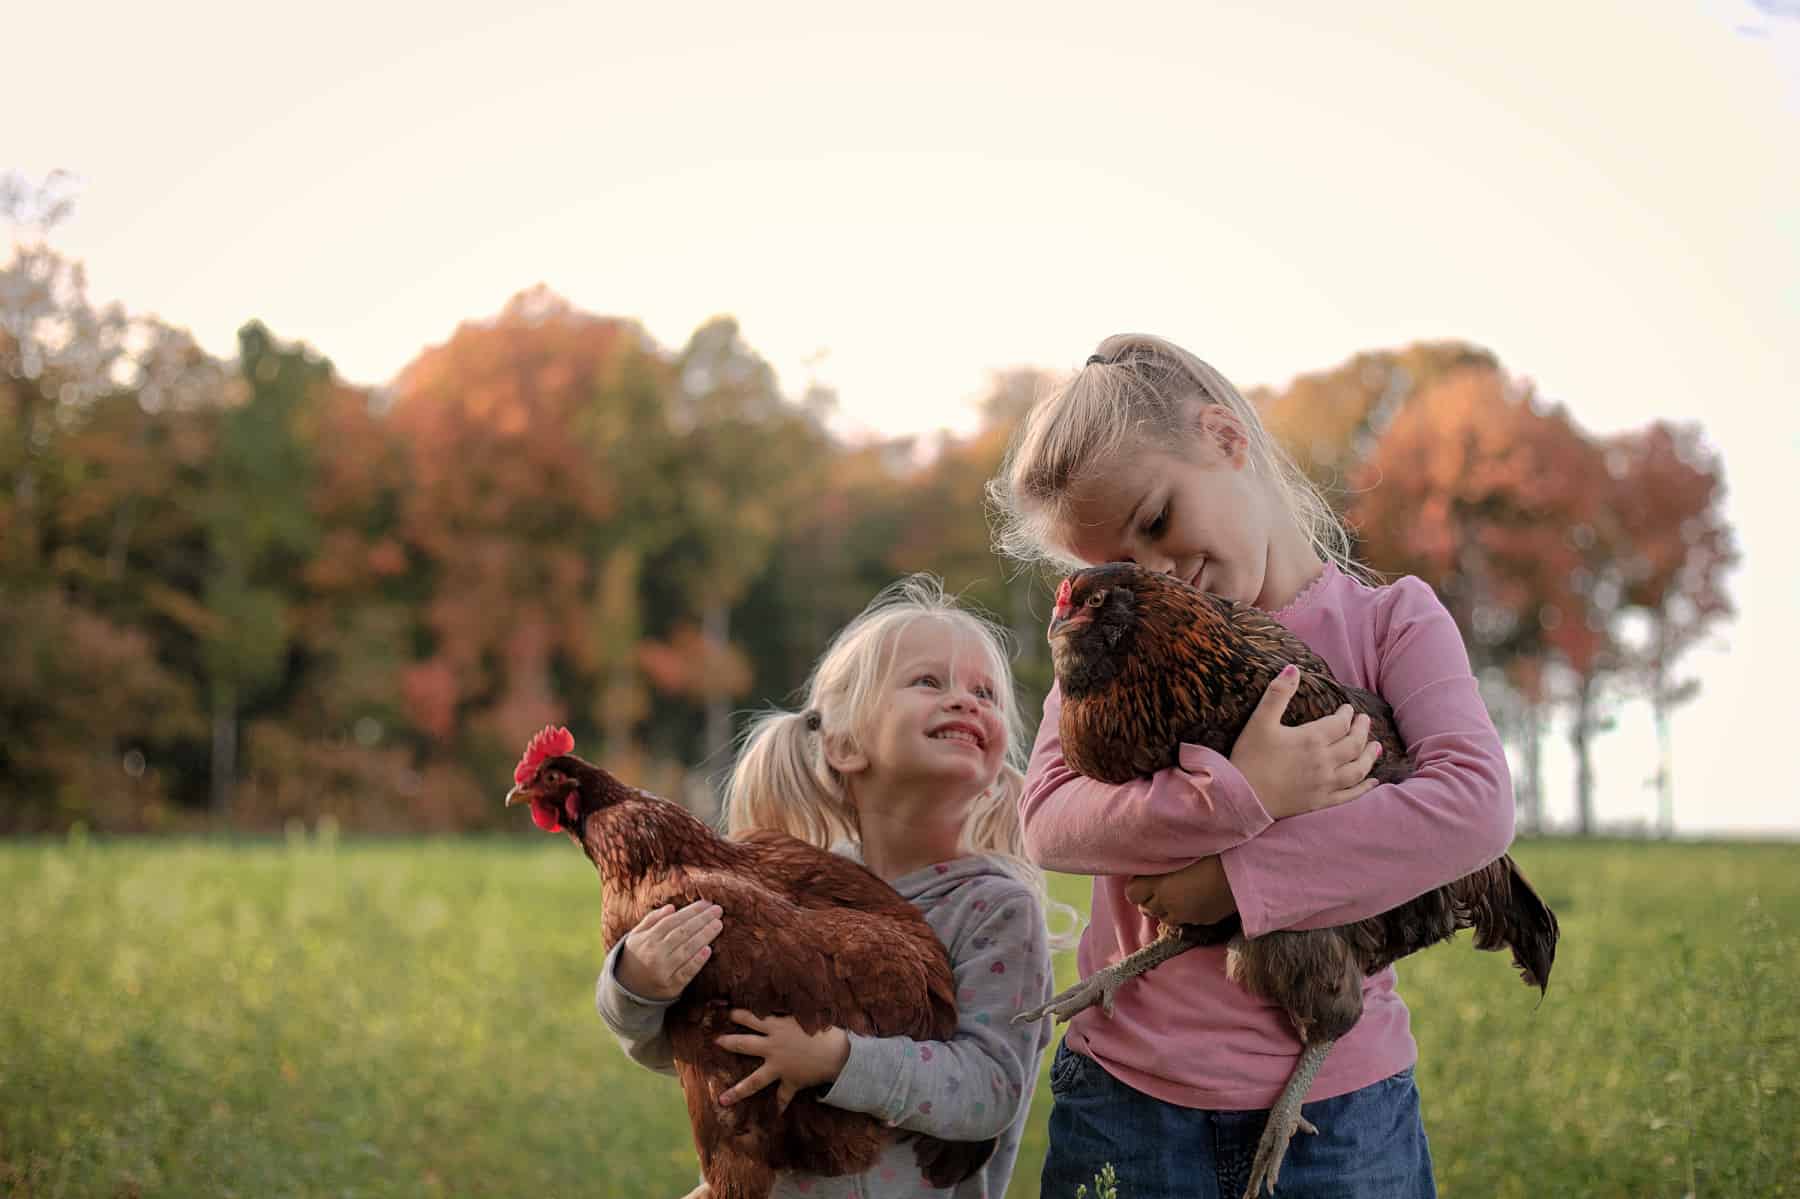 Raising Chickens with Kids